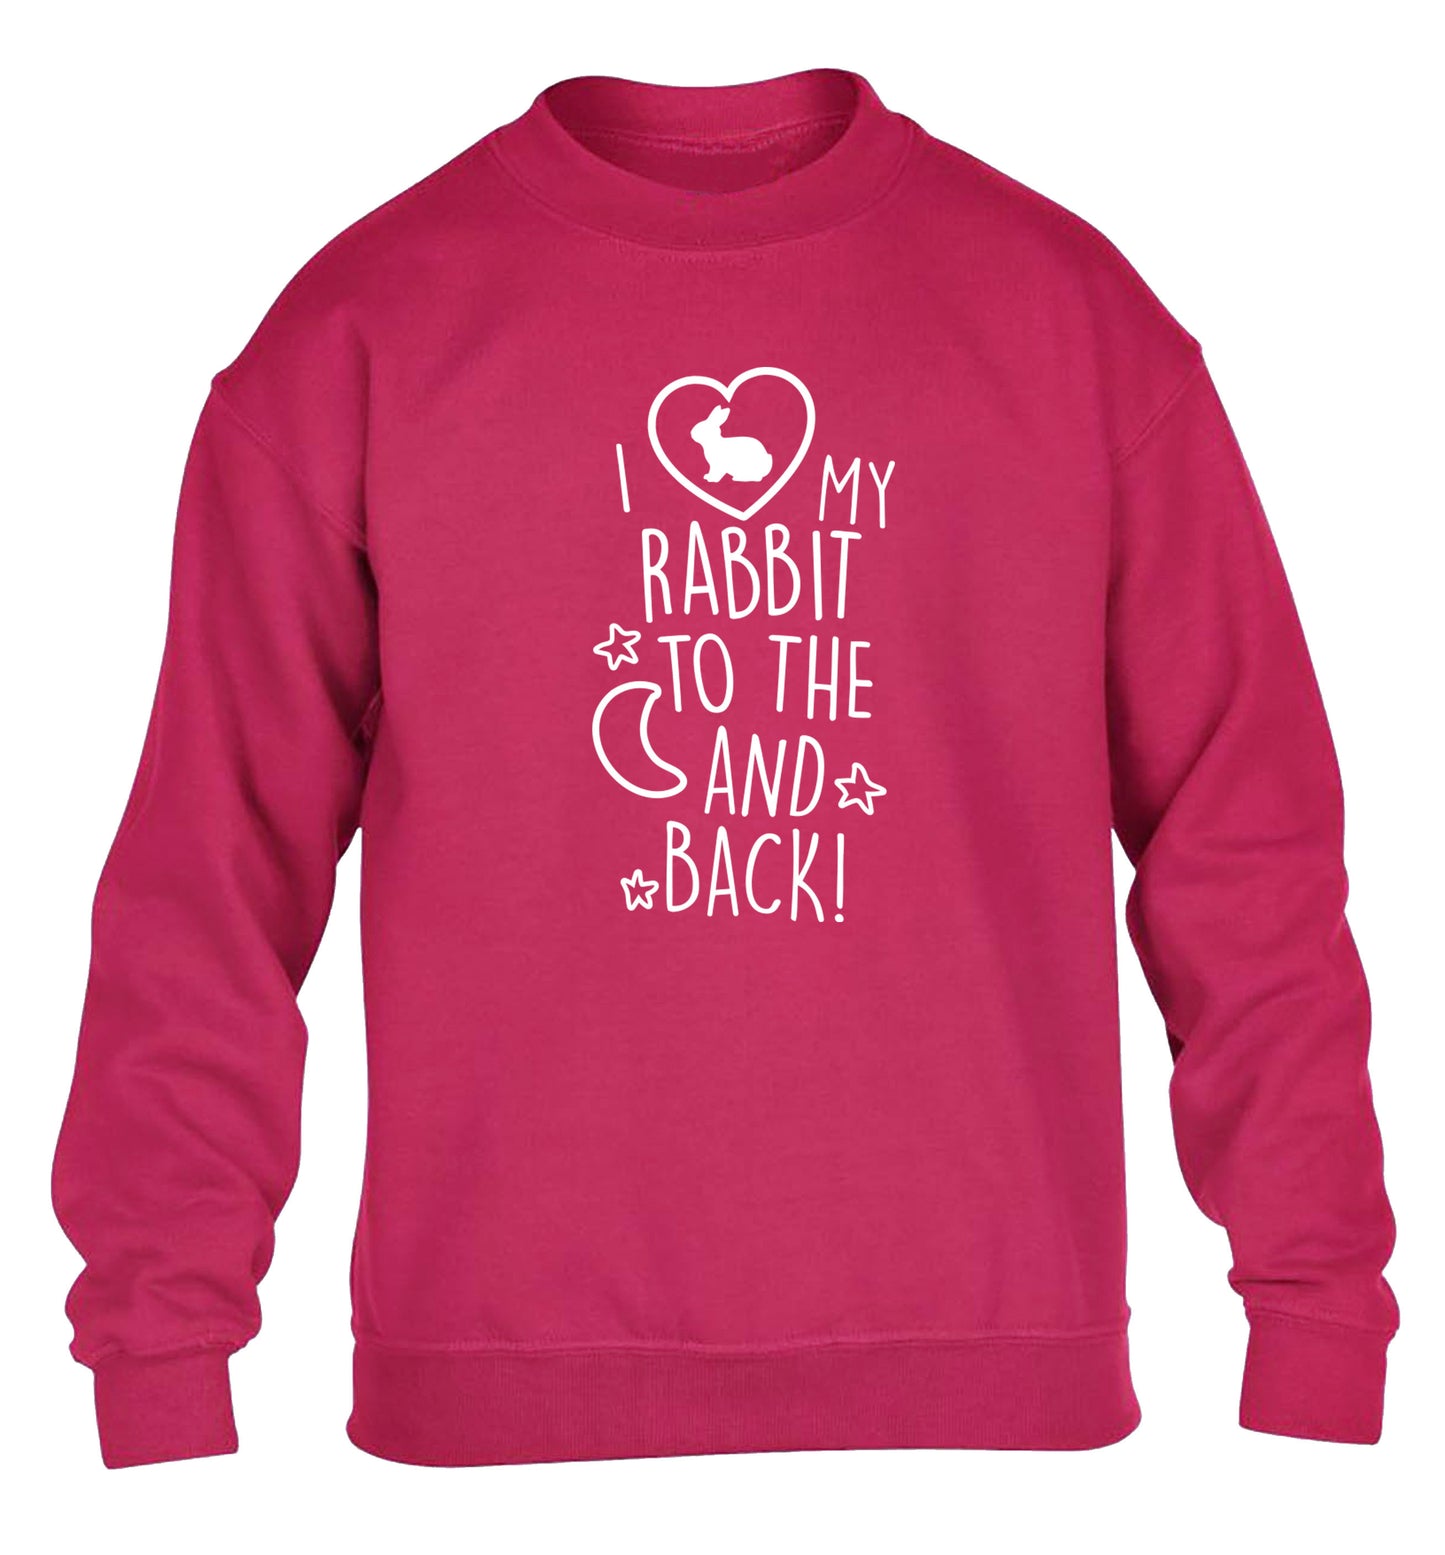 I love my rabbit to the moon and back children's pink  sweater 12-14 Years